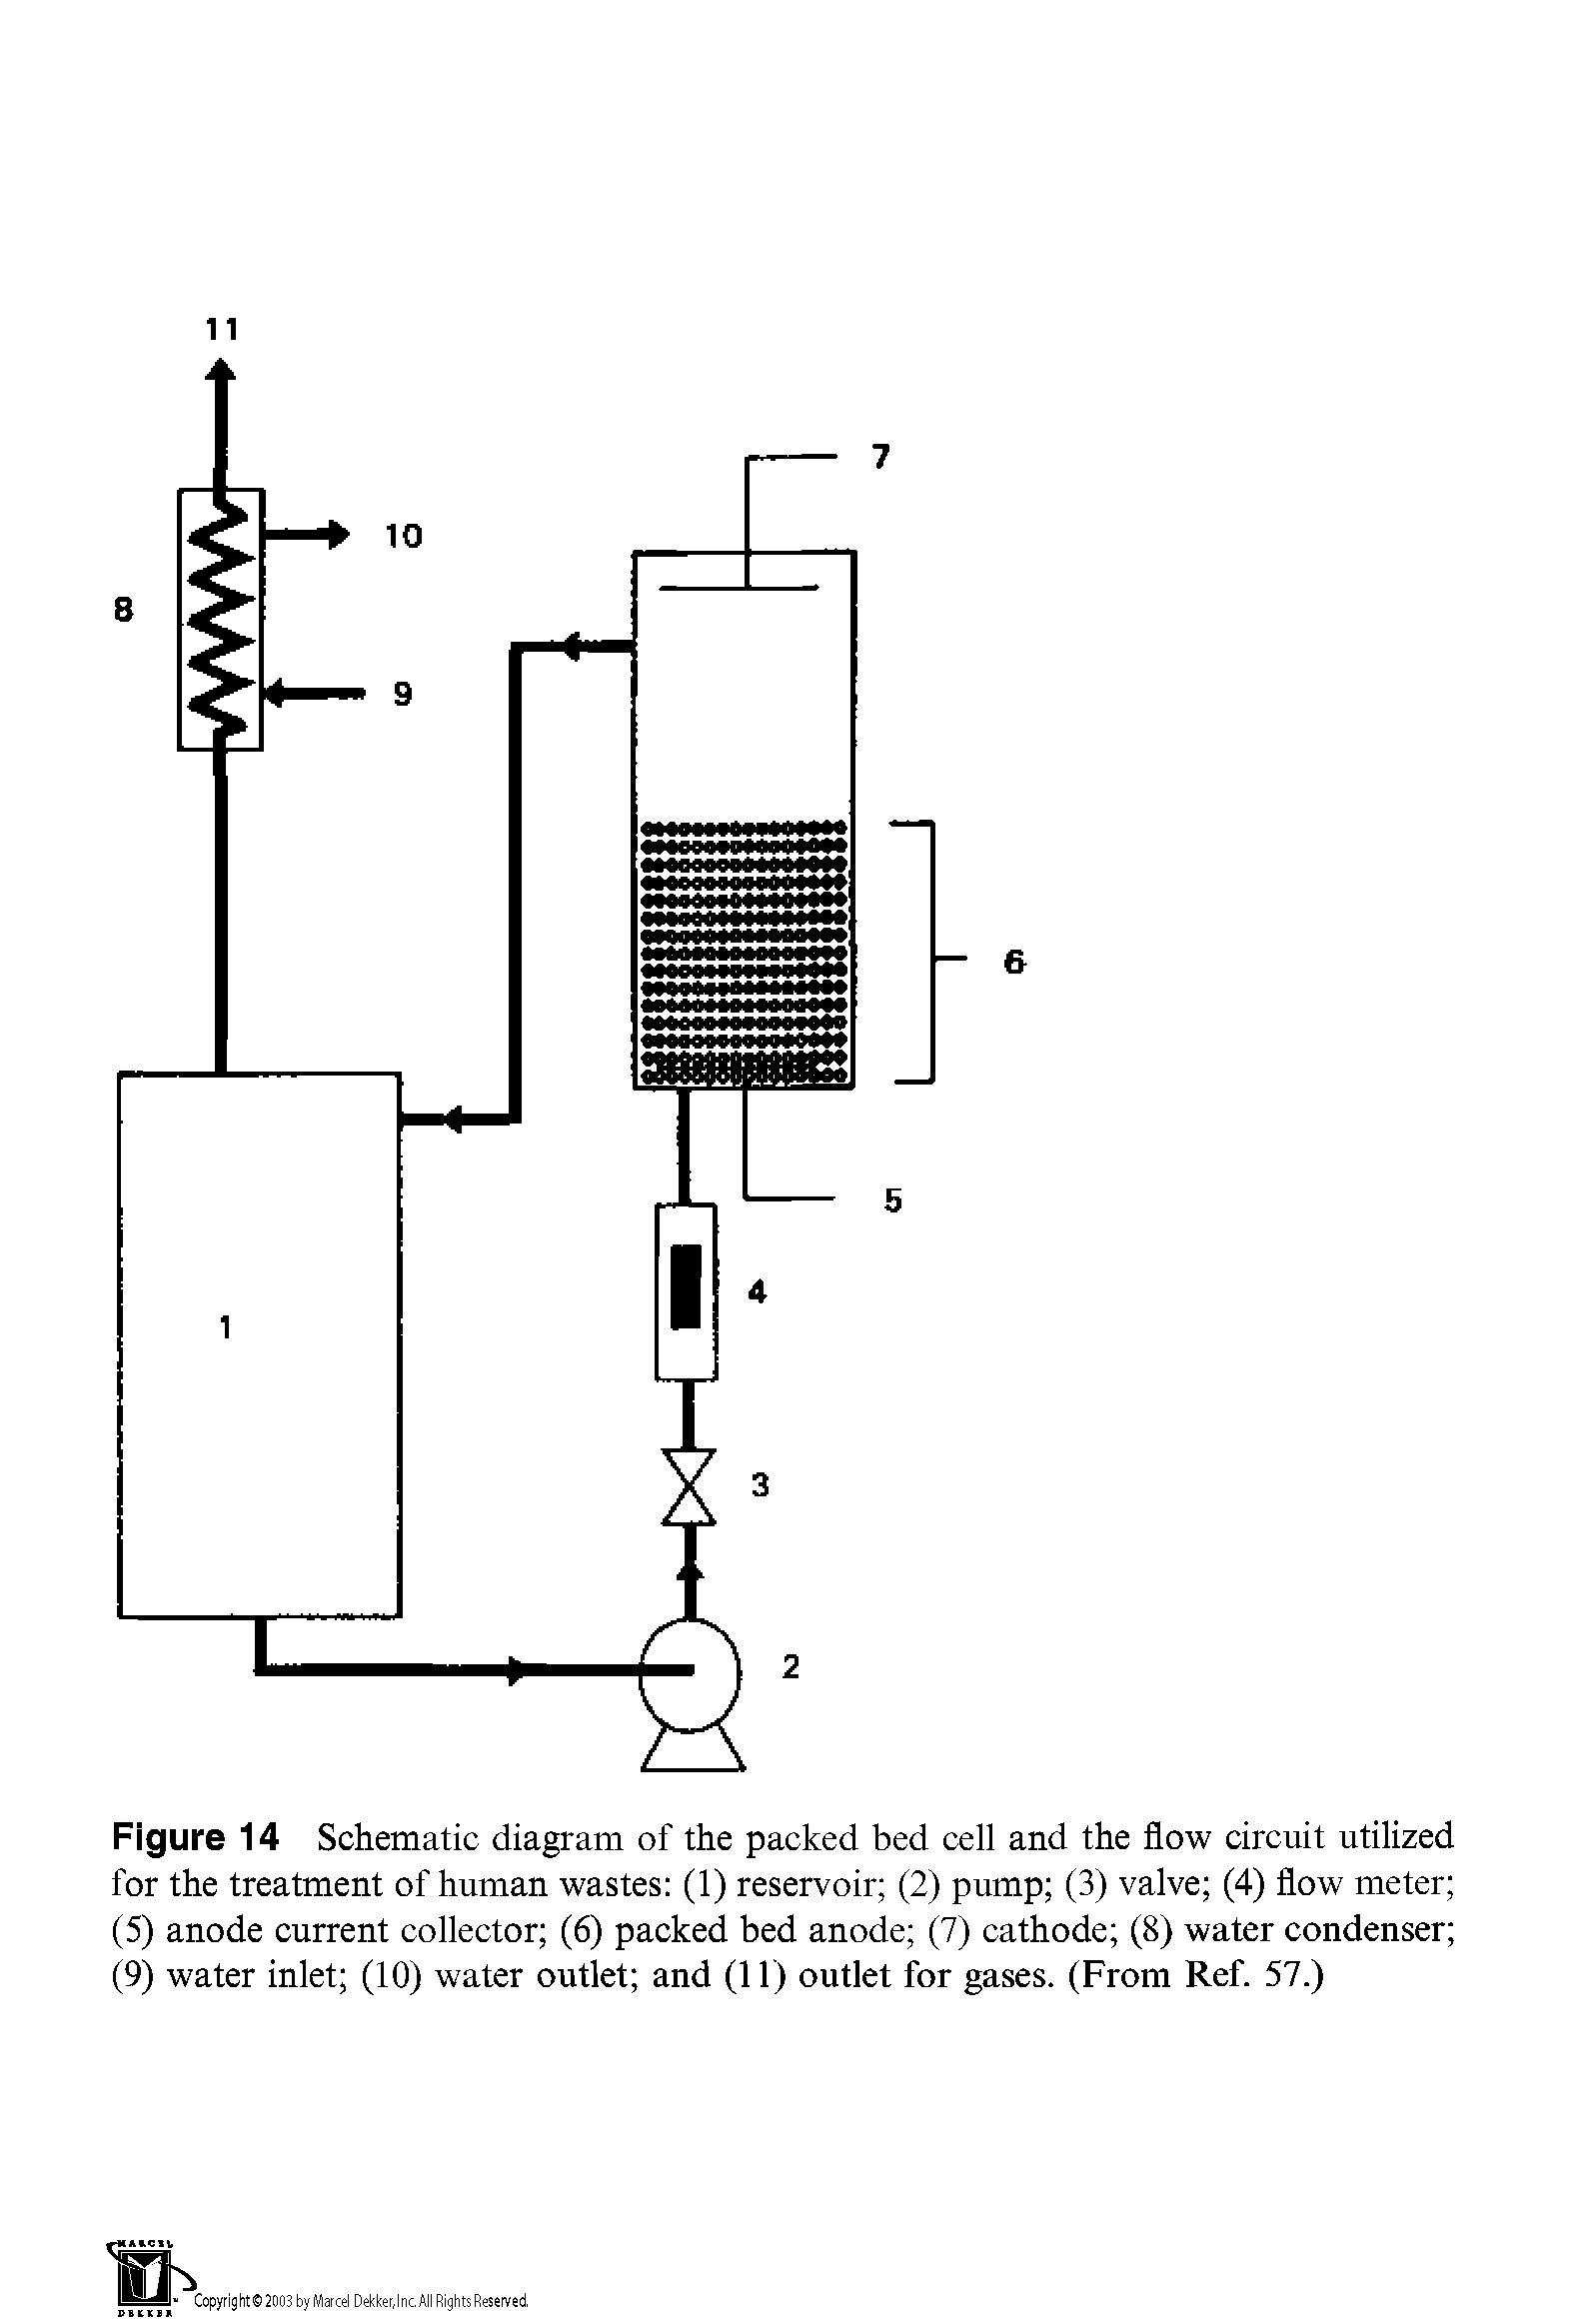 Figure 14 Schematic diagram of the packed bed cell and the flow circuit utilized for the treatment of human wastes (1) reservoir (2) pump (3) valve (4) flow meter (5) anode current collector (6) packed bed anode (7) cathode (8) water condenser (9) water inlet (10) water outlet and (11) outlet for gases. (From Ref. 57.)...